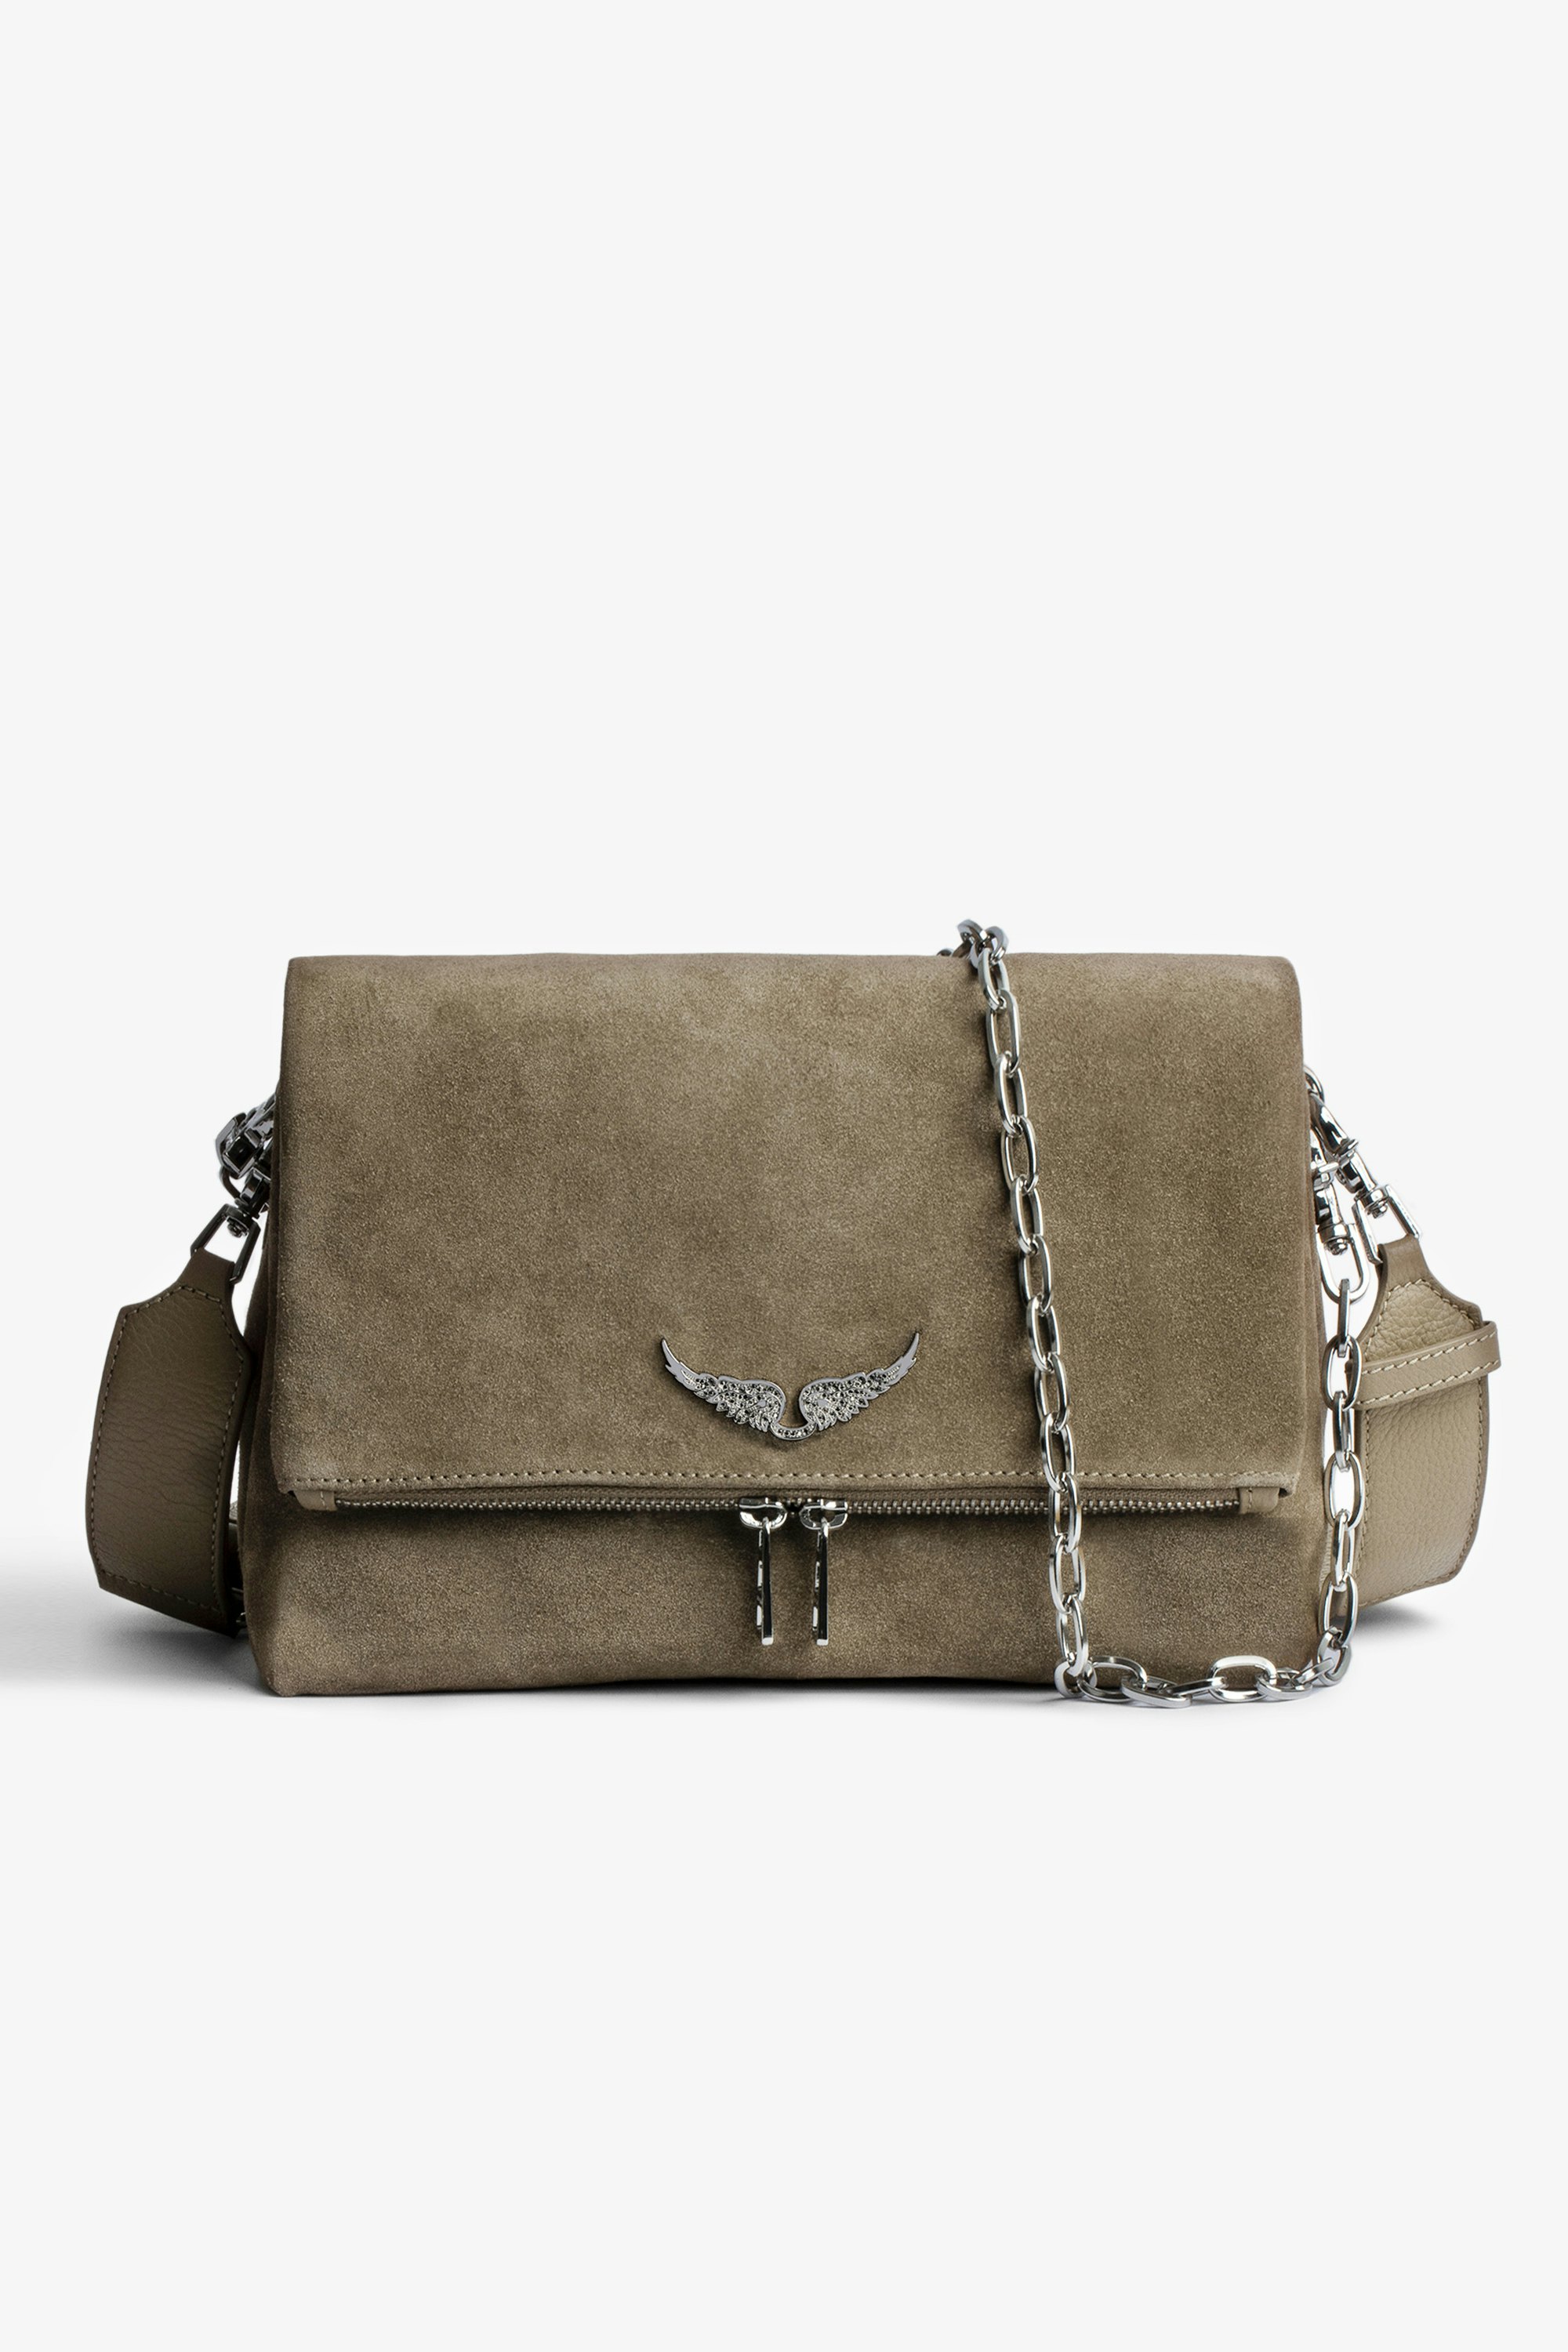 Rocky Suede バッグ Women’s taupe suede bag with silver-tone metal shoulder strap